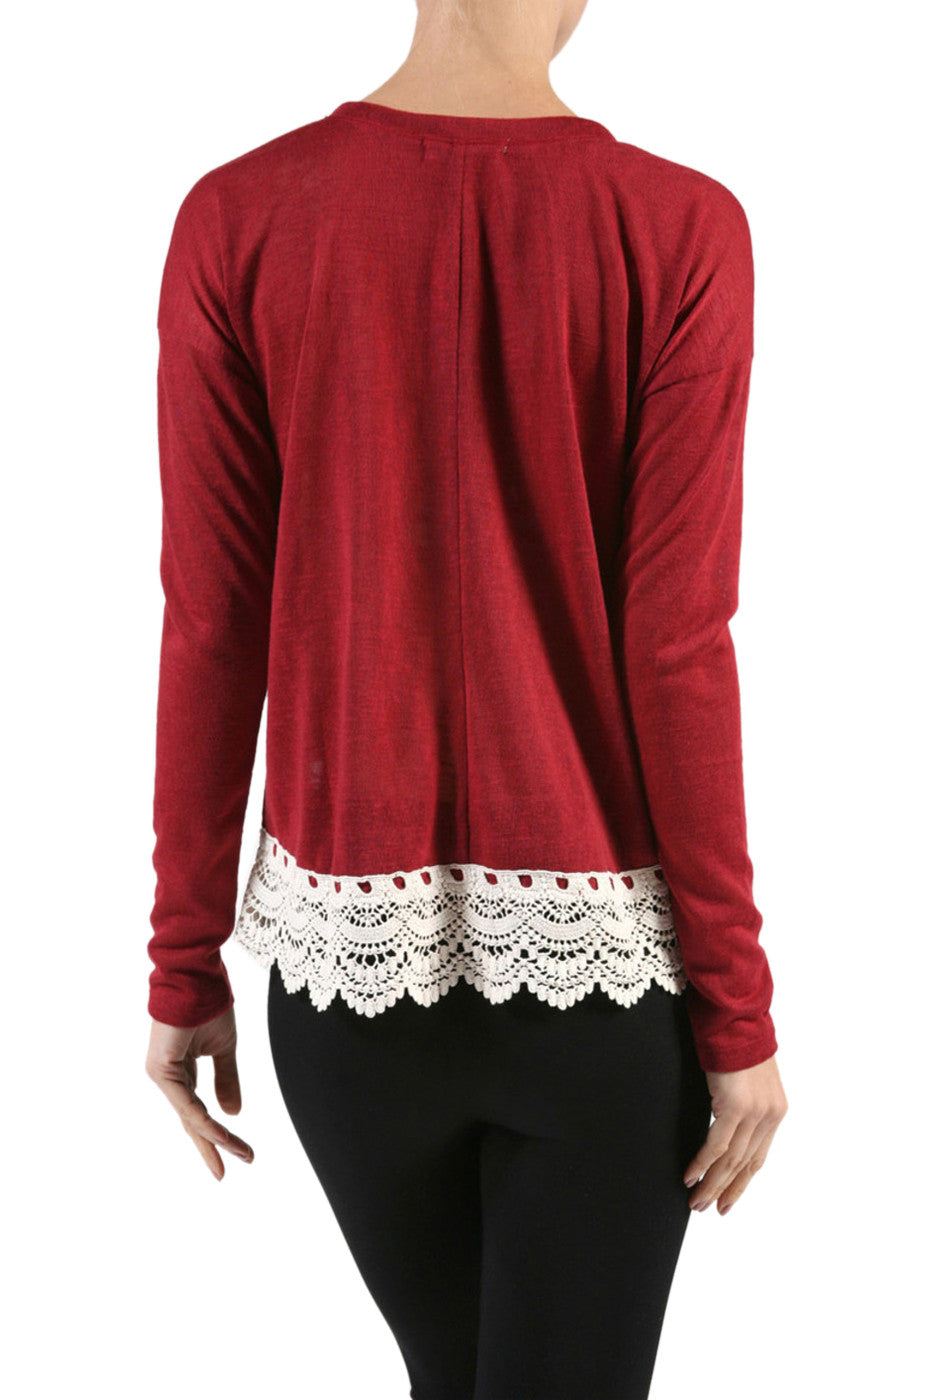 Long Sleeve Sweater With Sheer Lace Trim – BodiLove Fashion Store